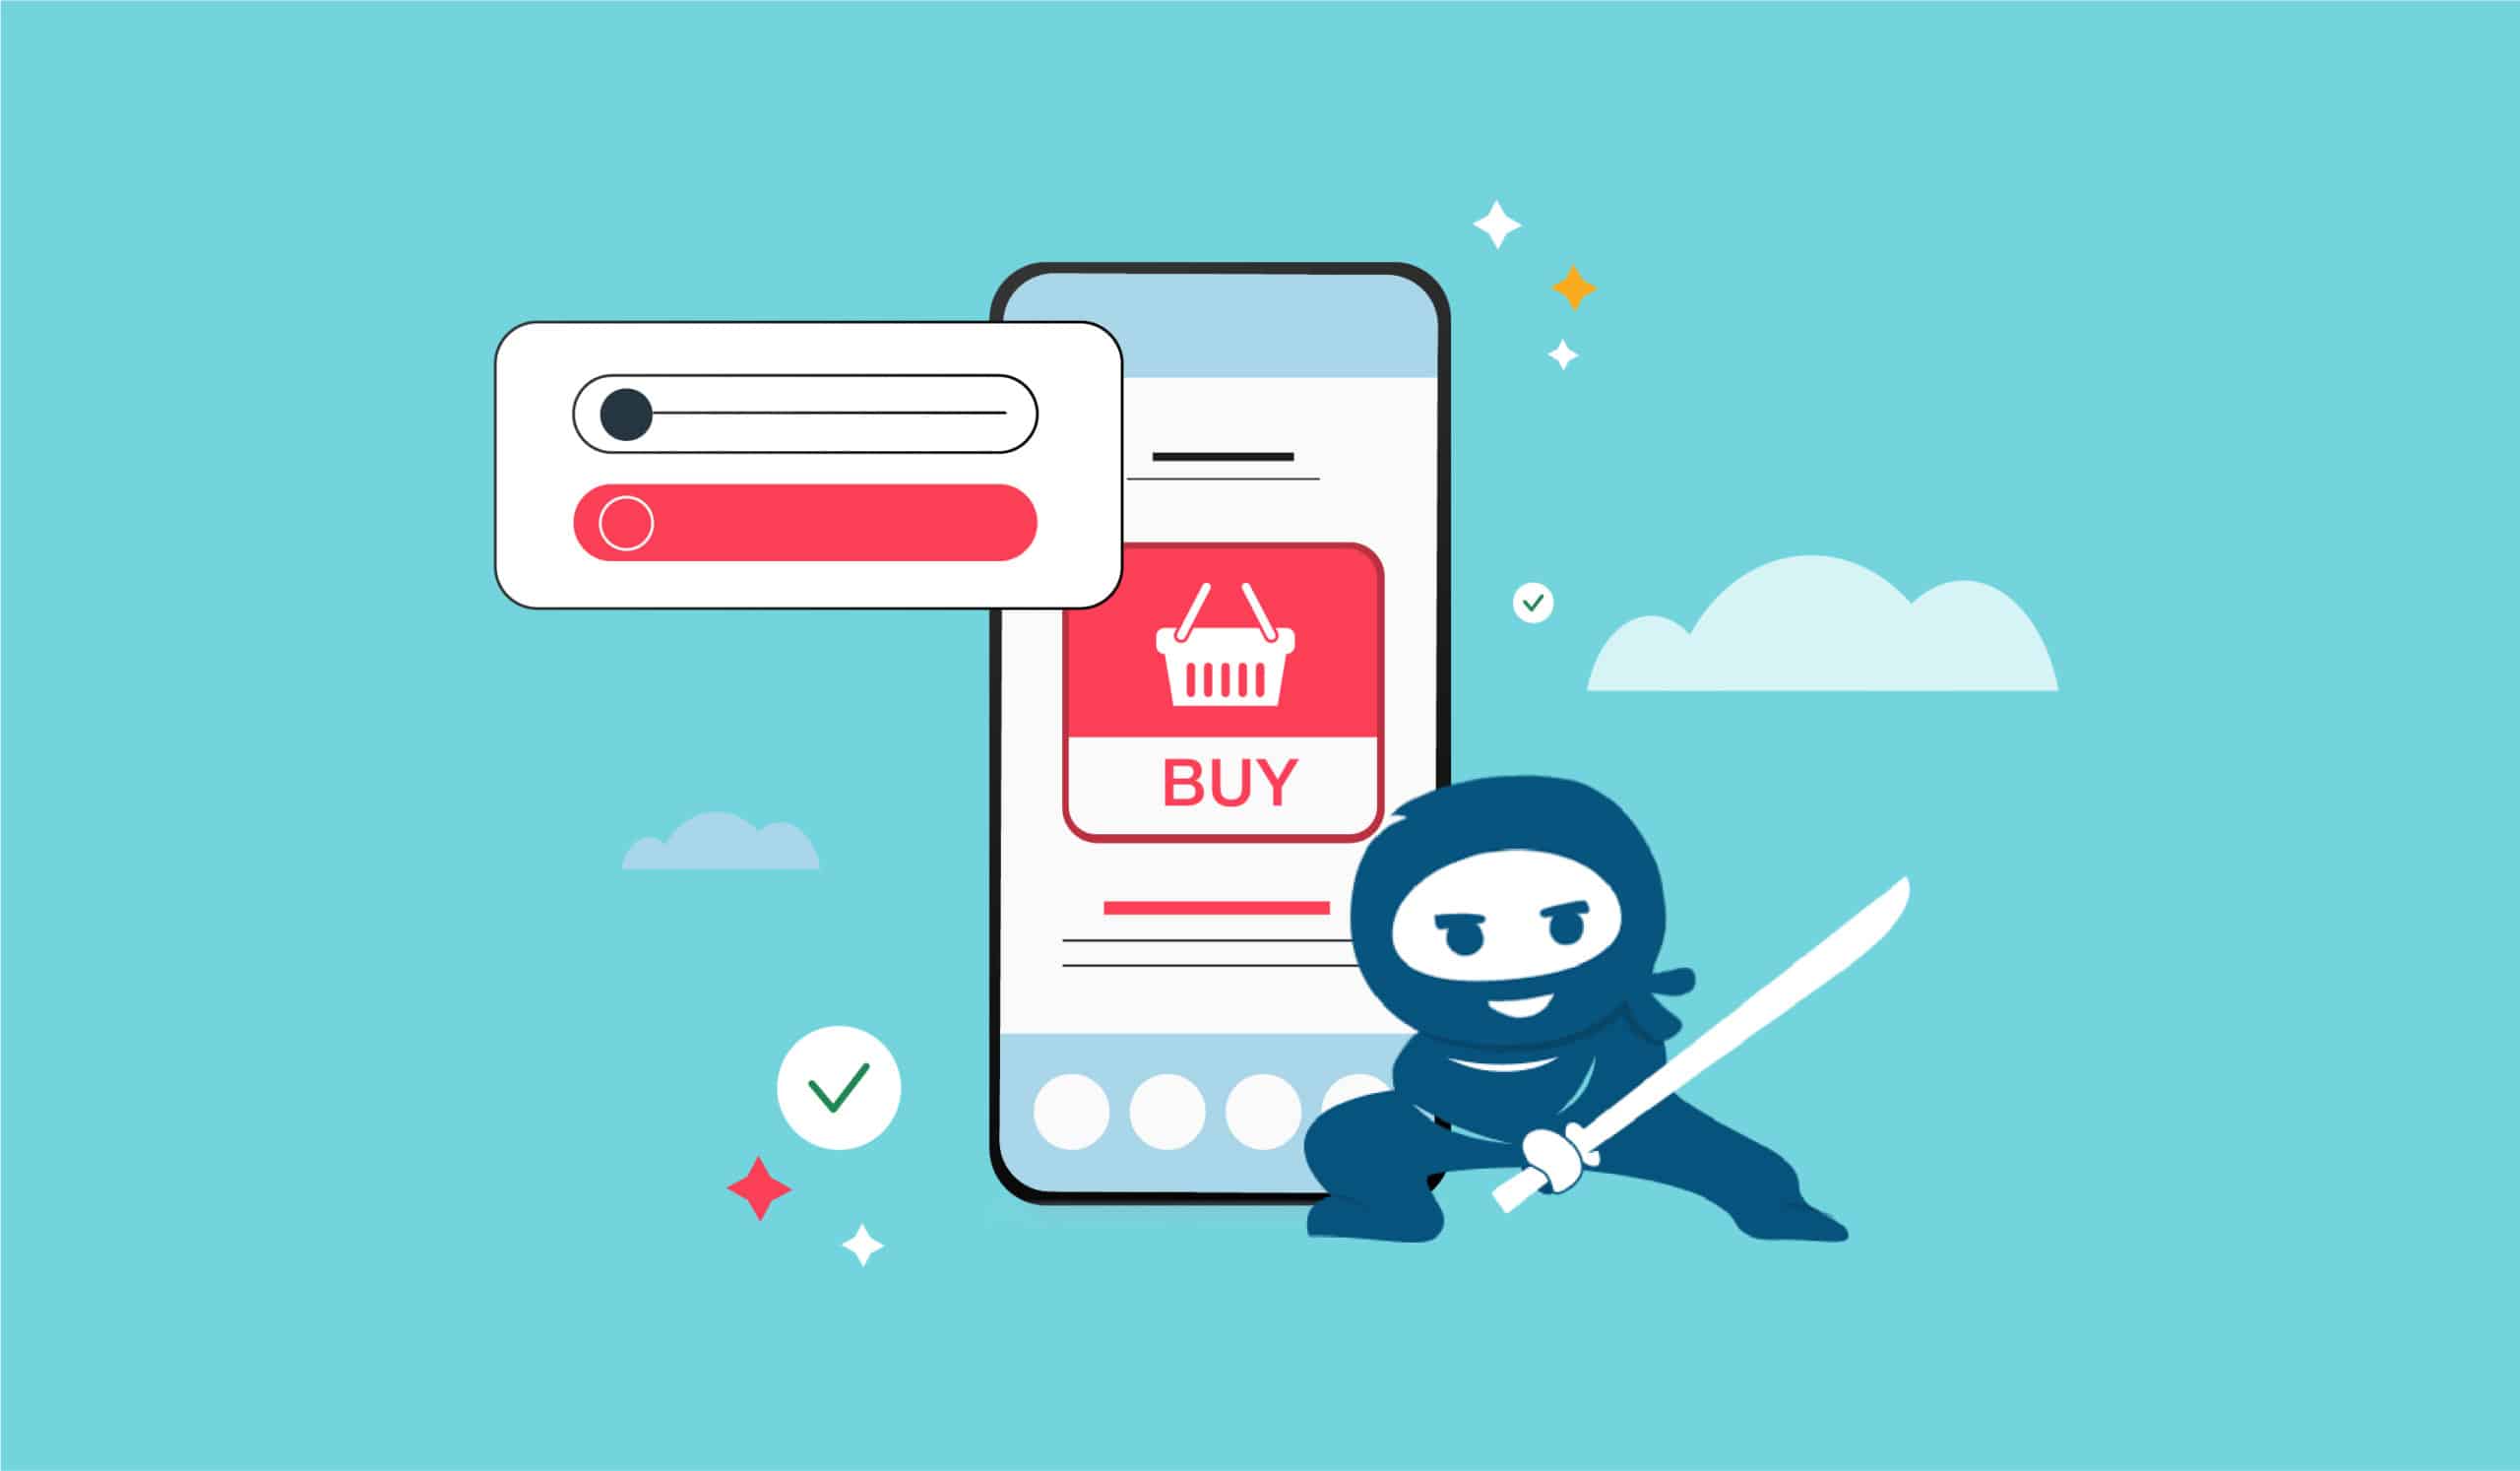 wooninjas guide to optmizing woocommerce checkout flow